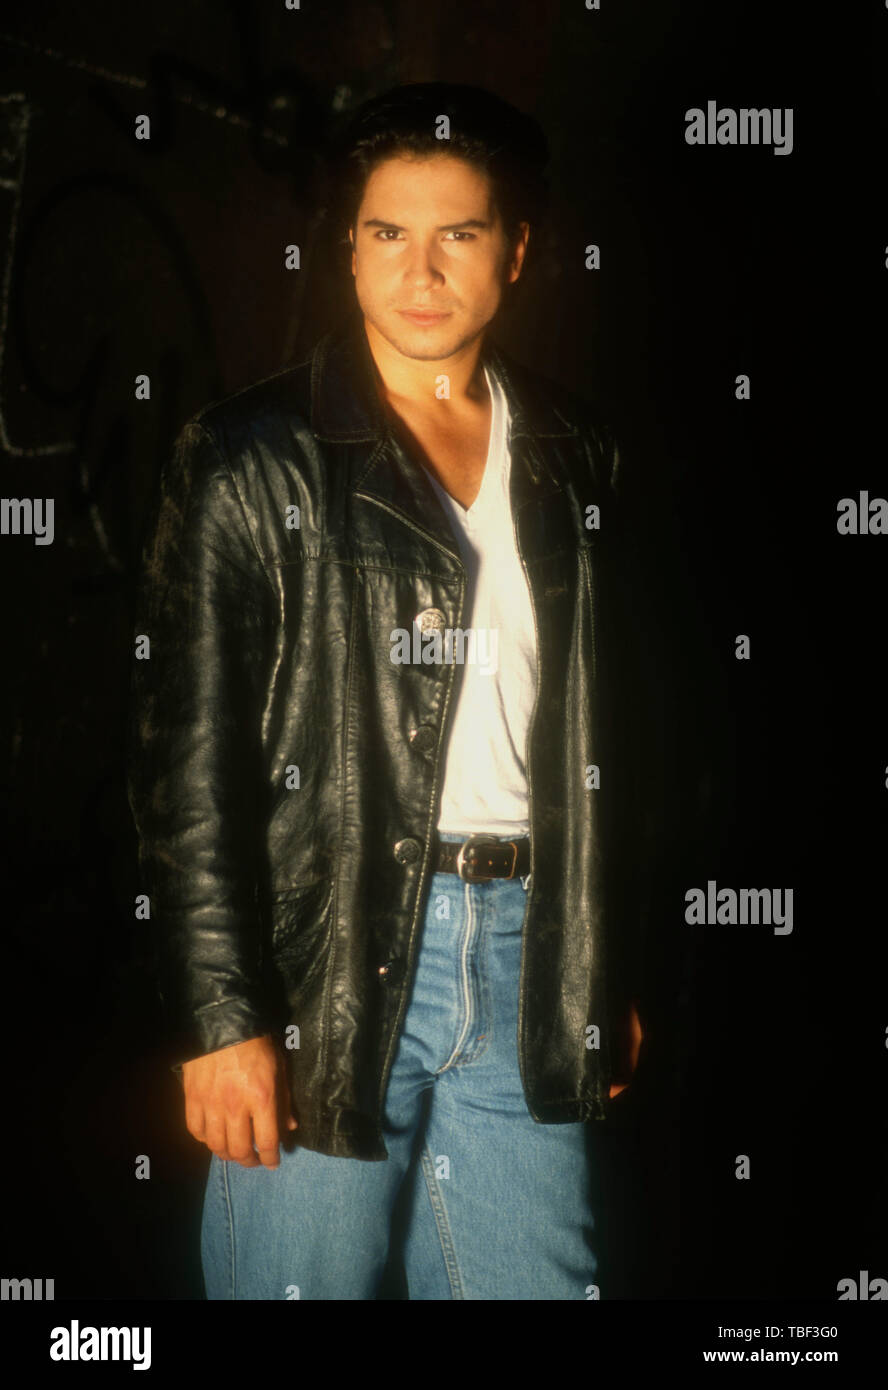 Los Angeles, California, USA 1st June 1994 (Exclusive )  Actor Marco Sanchez poses at a photo shoot on June 1, 1994 in Los Angeles, California, USA. Photo by Barry King/Alamy Stock Photo Stock Photo